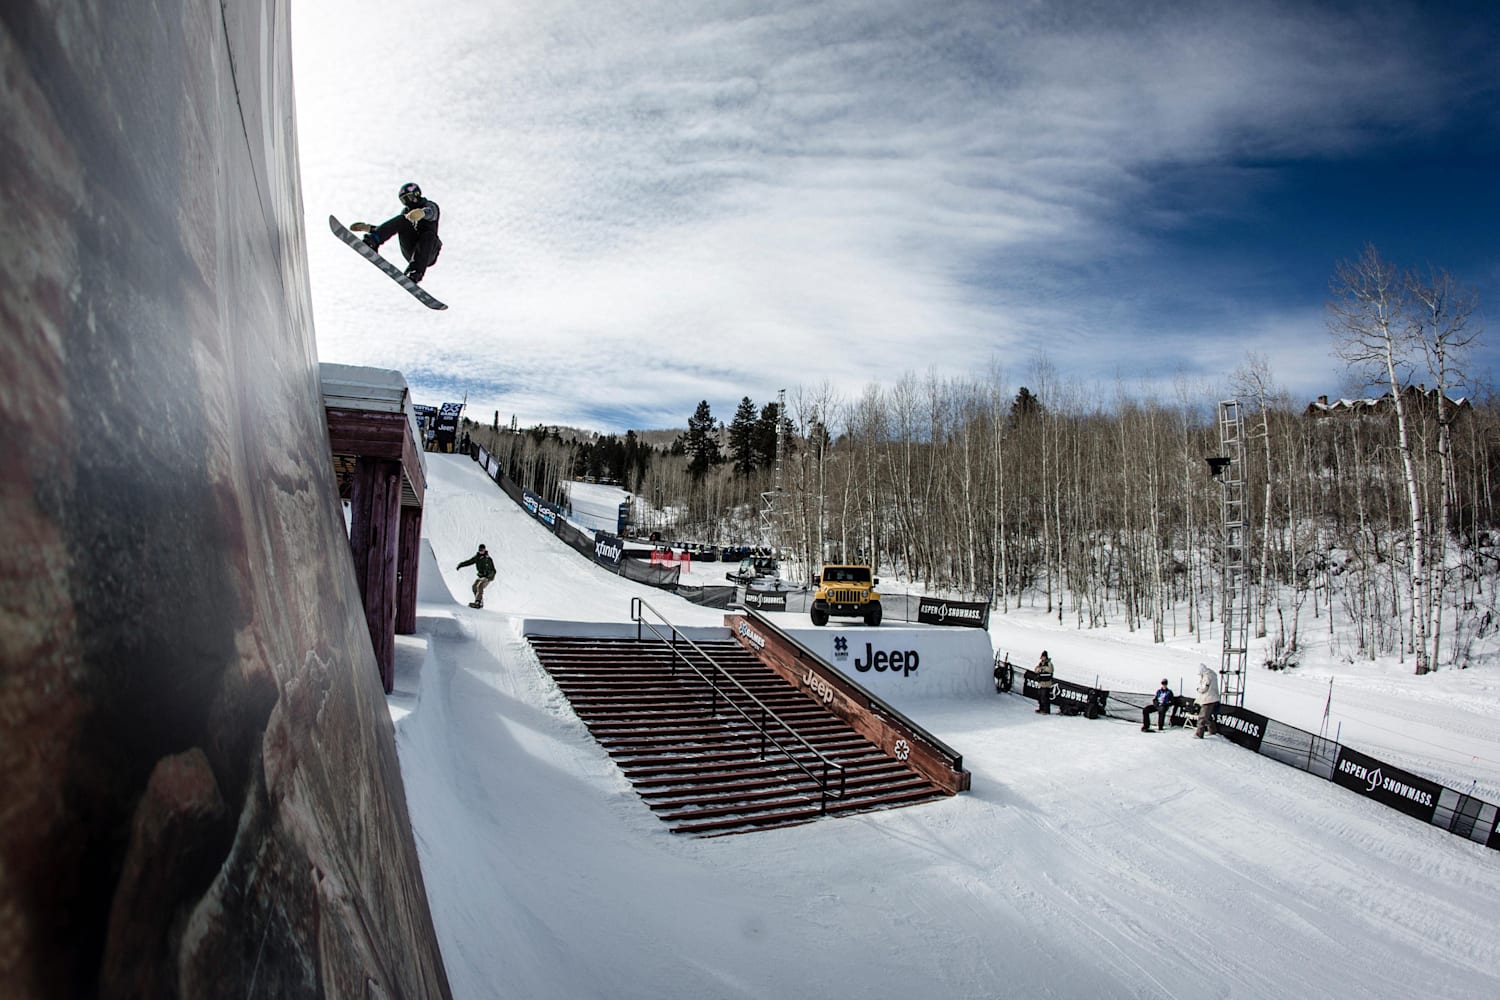 Snowboard and freeski photos from Winter X Games, Aspen